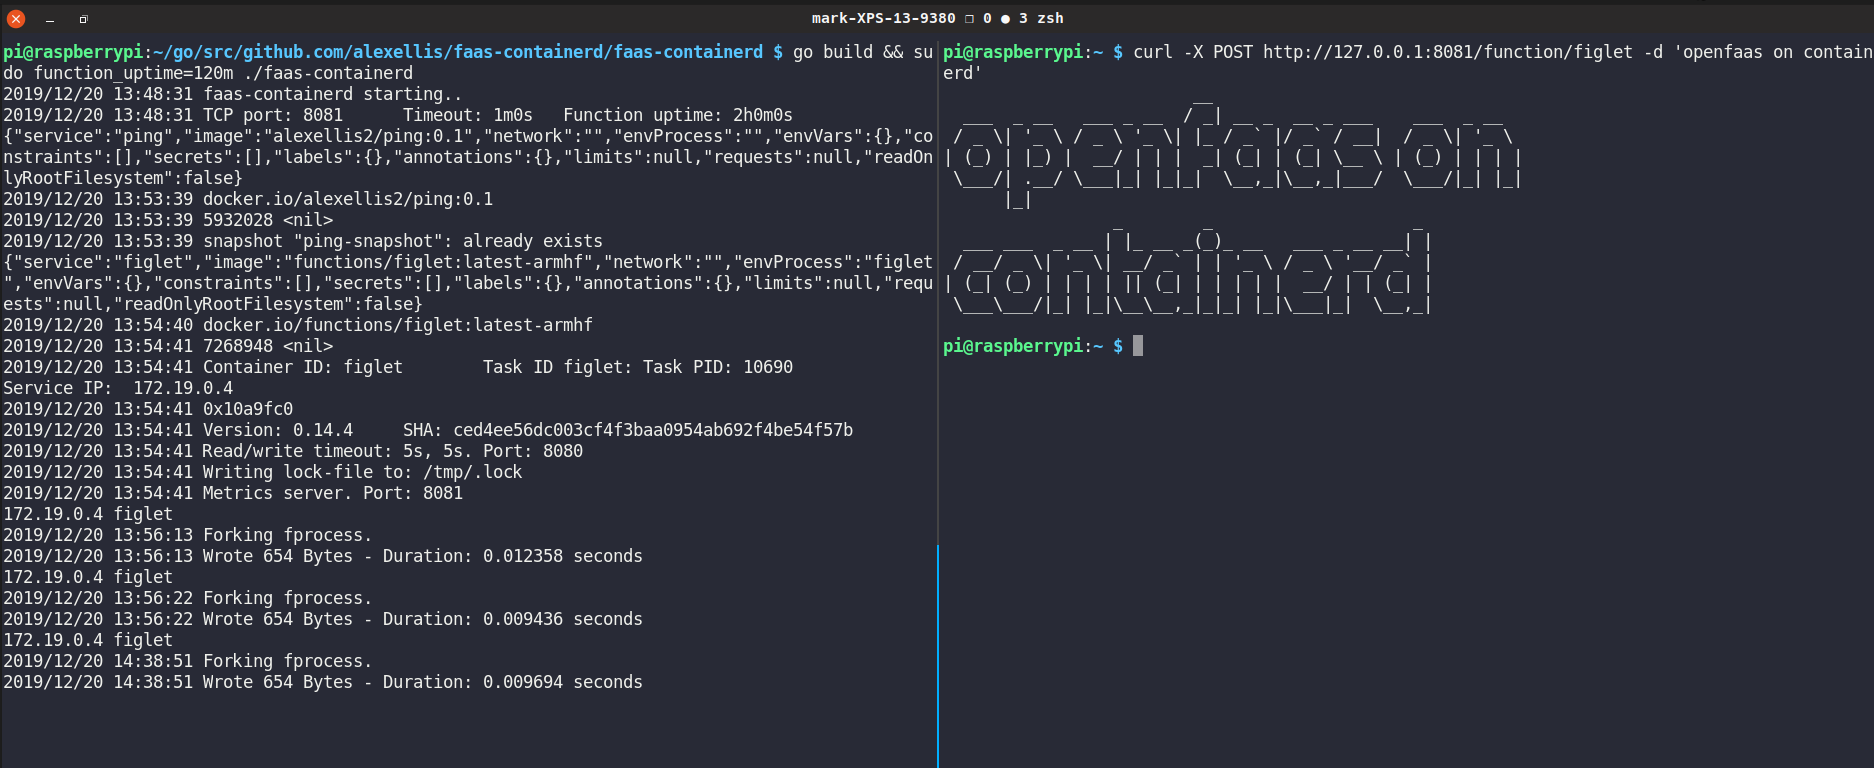 OpenFaas on a Raspberry Pi 4 using Containerd